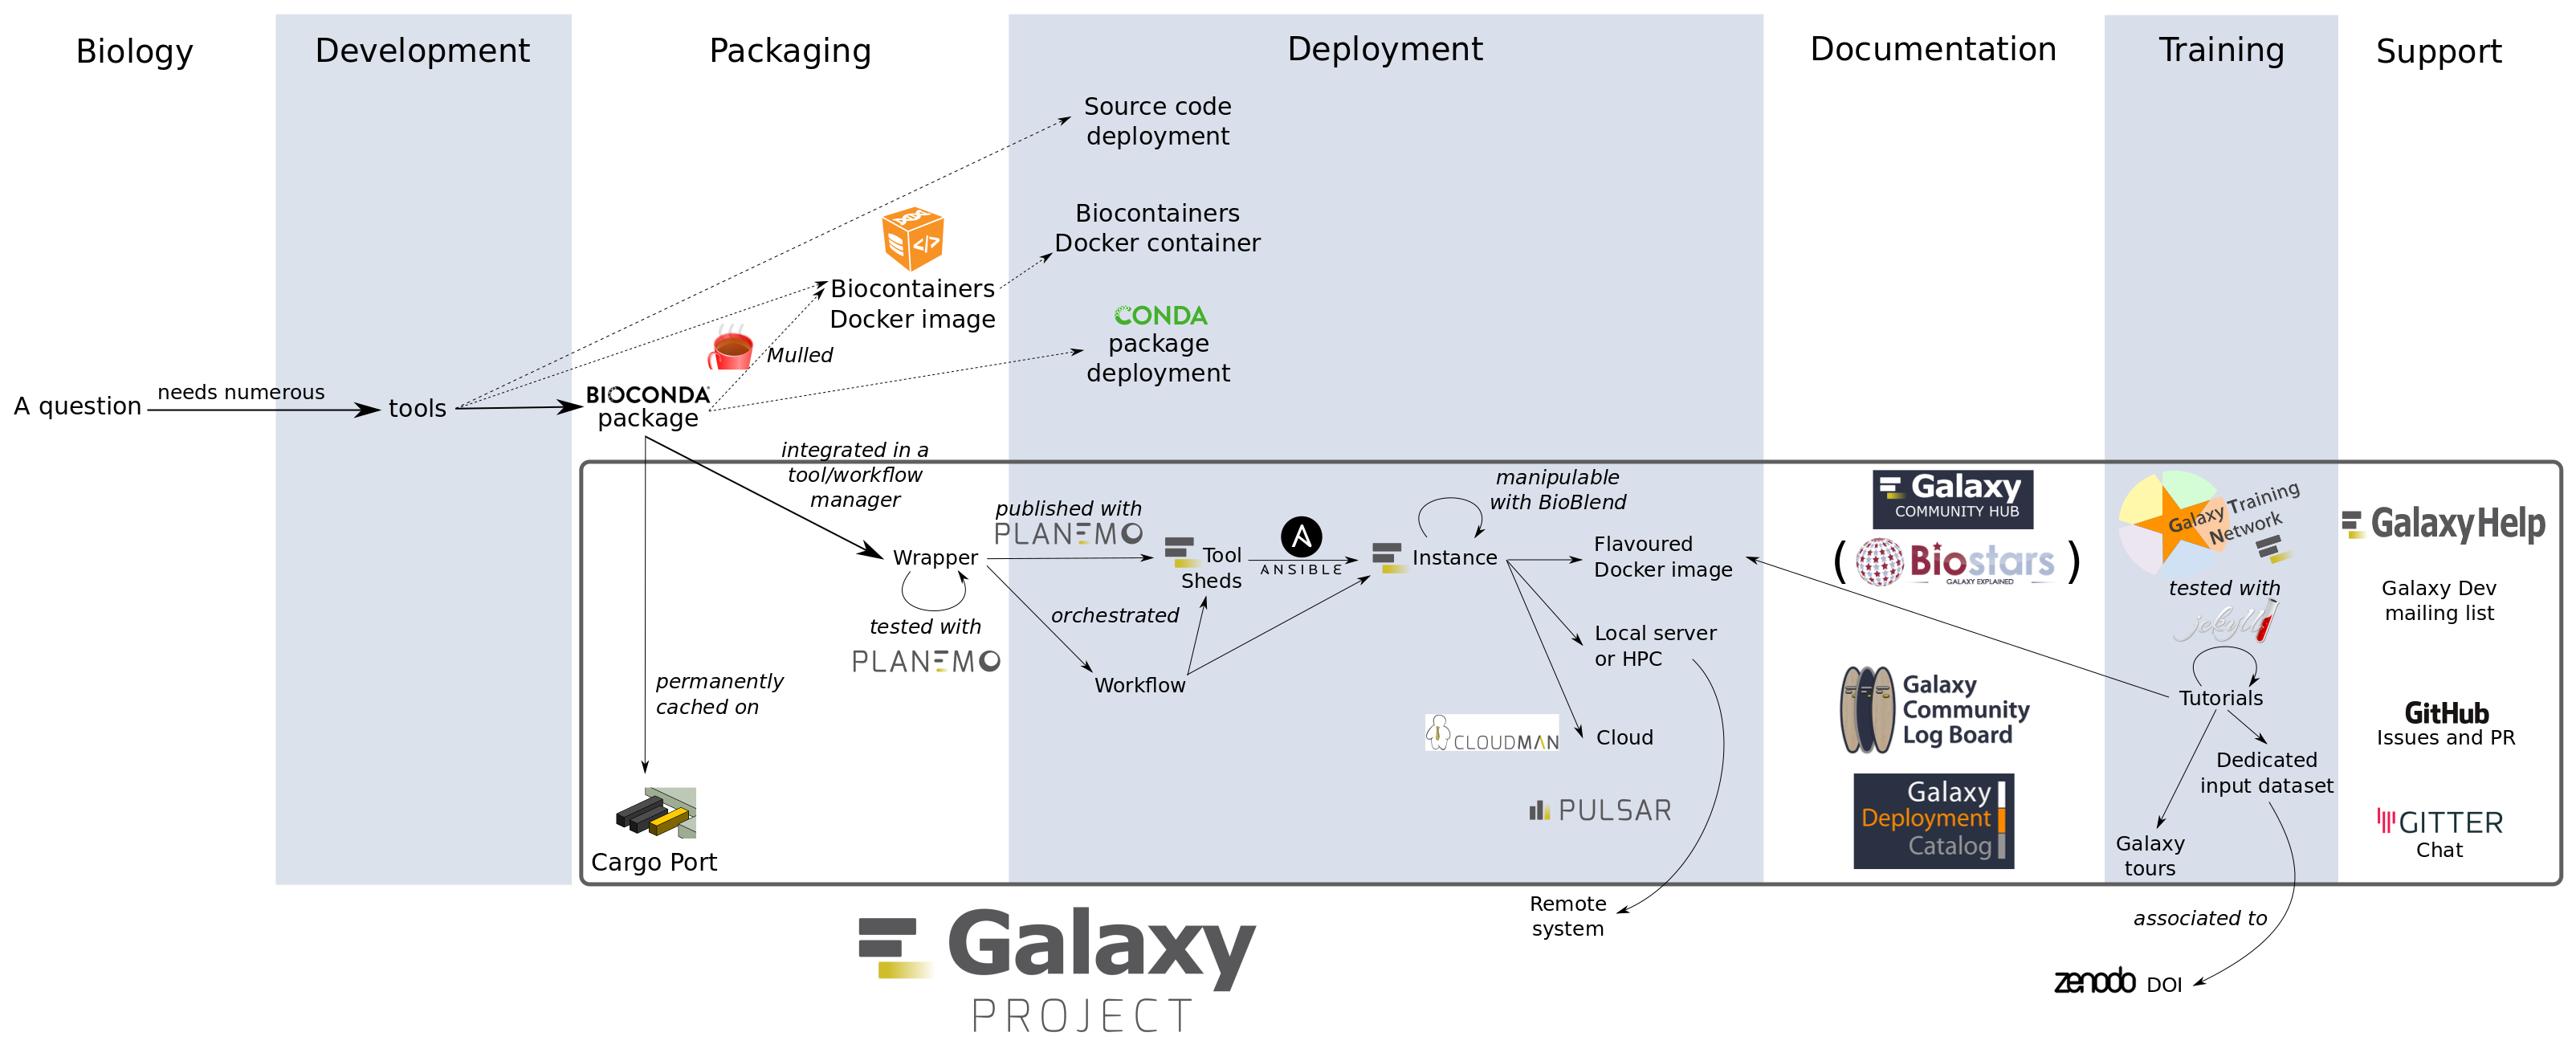 a large schematic with columns biology, development, packaging, deployment, documentation, training, support. various projects are annotated and a box drawn around the galaxy managed ones.